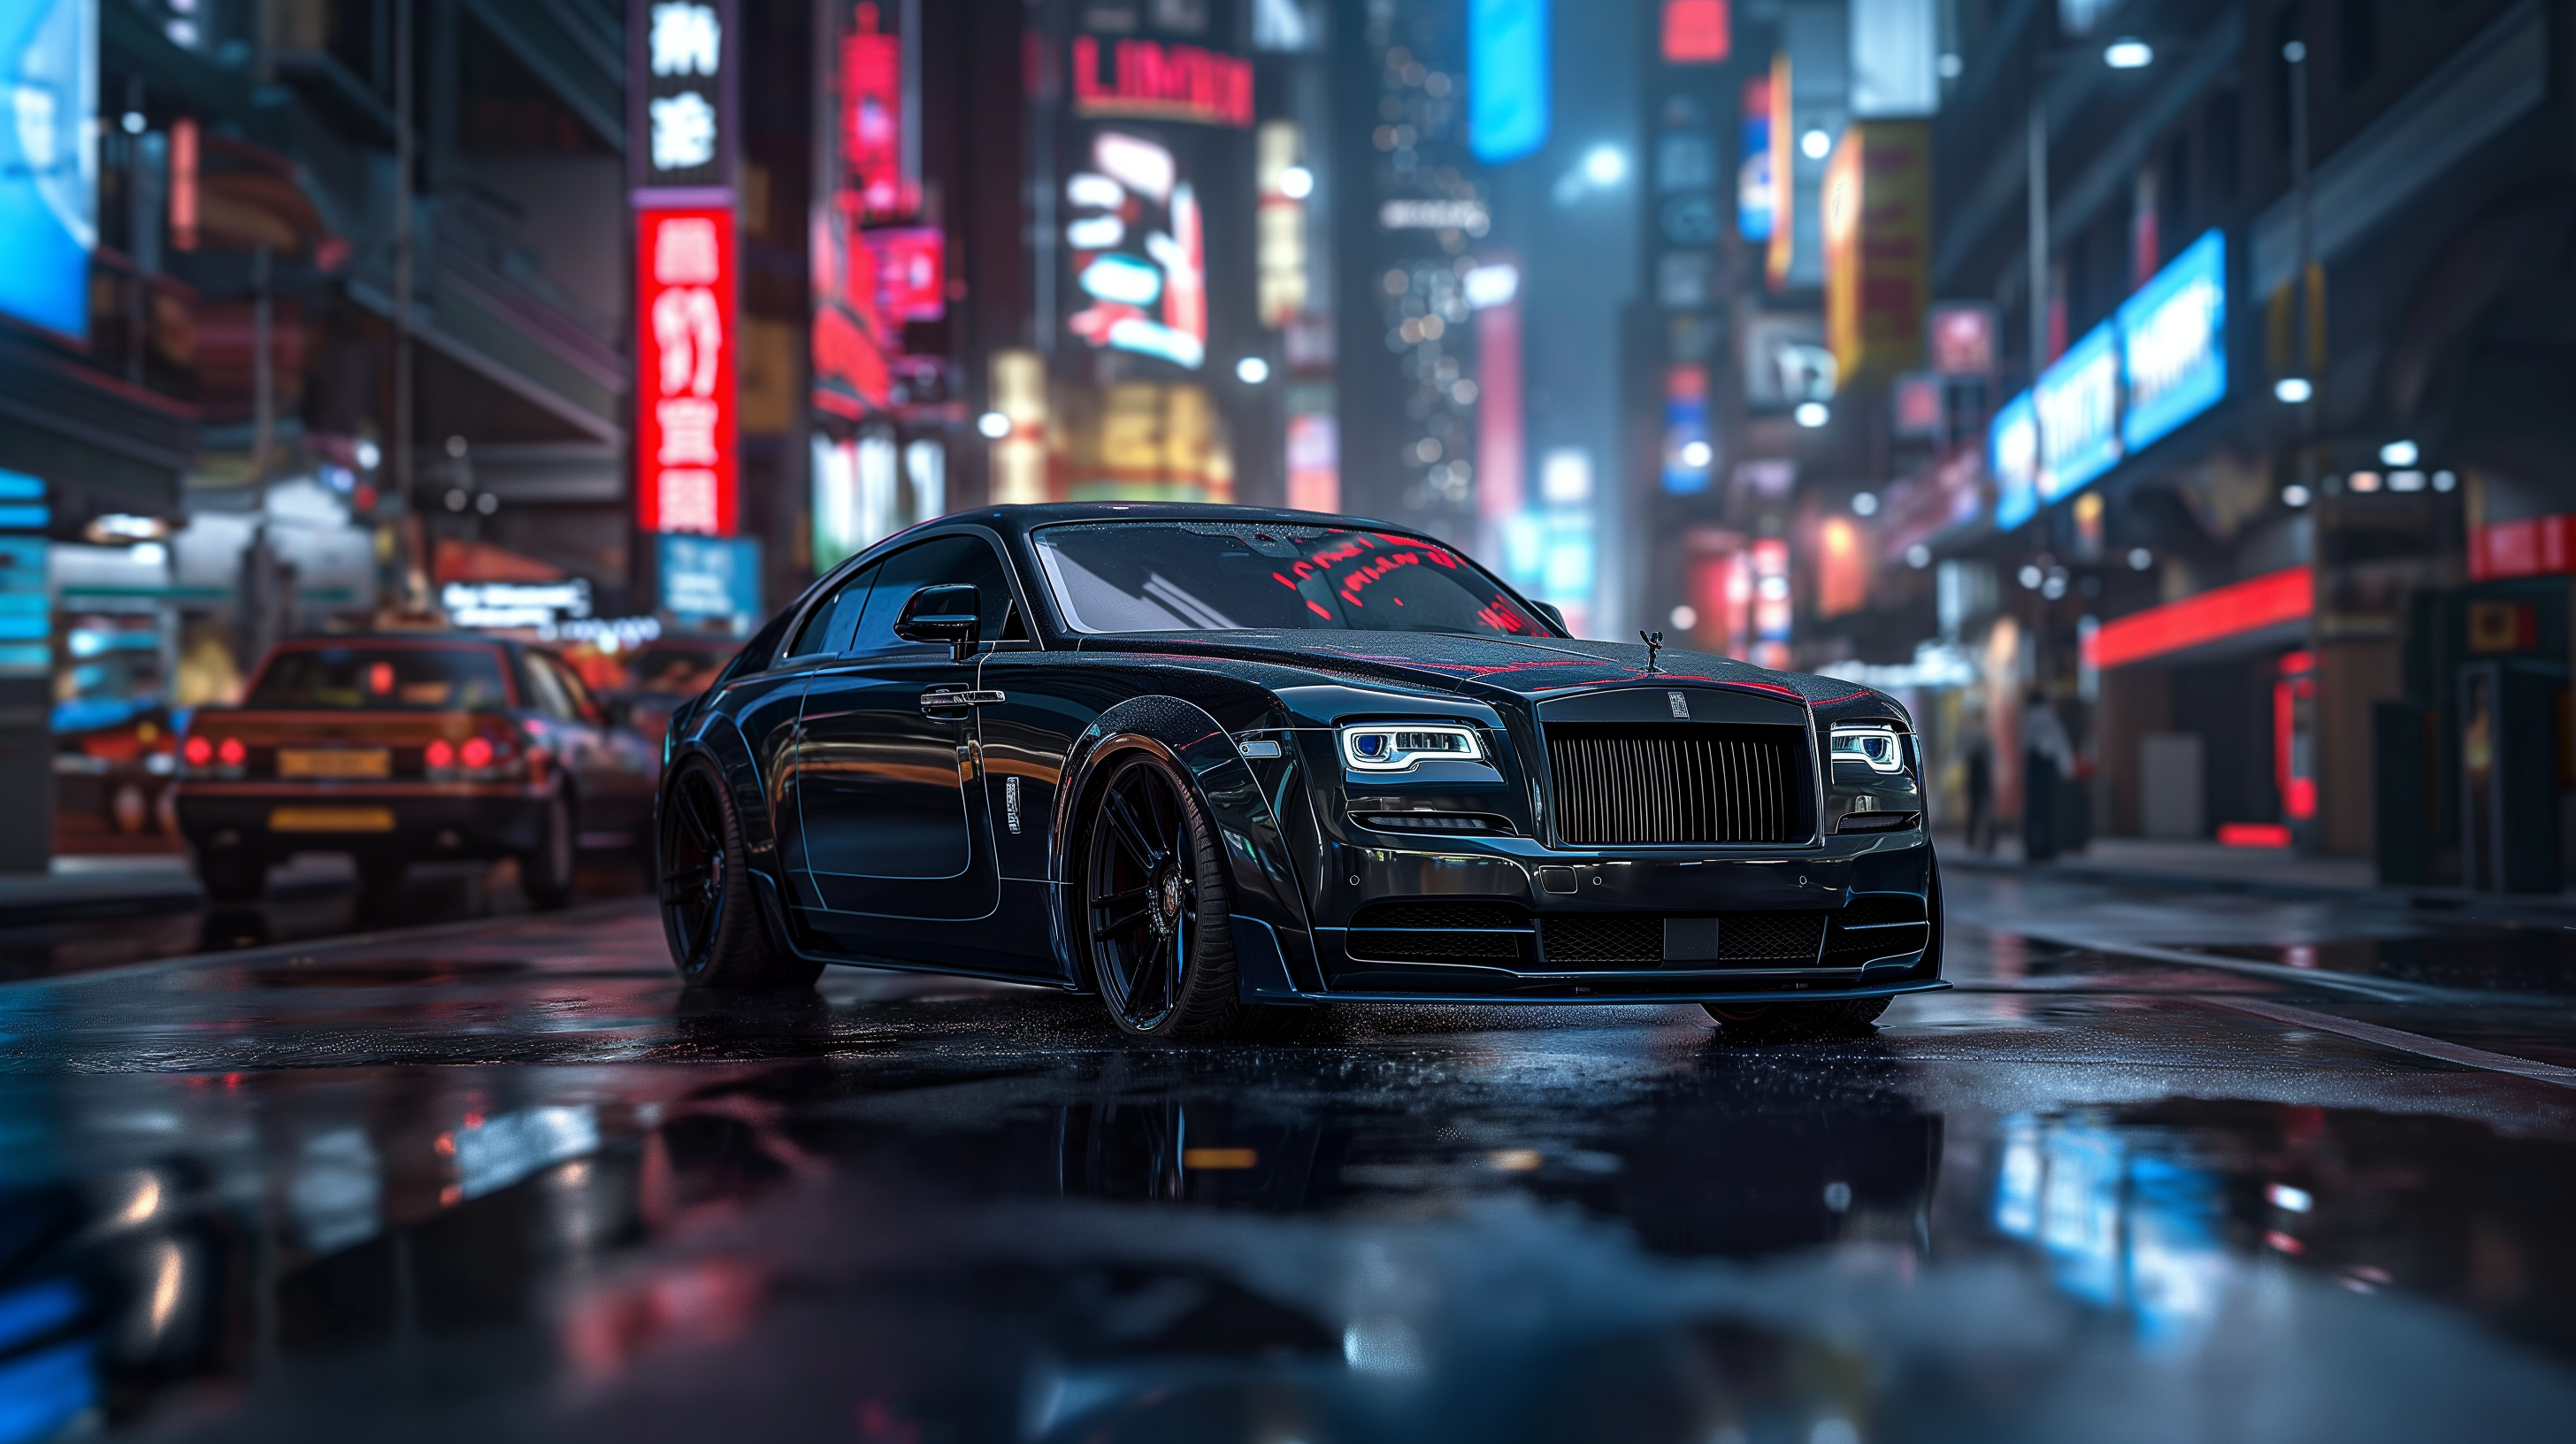 General 2912x1632 car Rolls Royce Wraith AI art cyberpunk frontal view headlights vehicle depth of field wet sign building city lights reflection taillights wet road